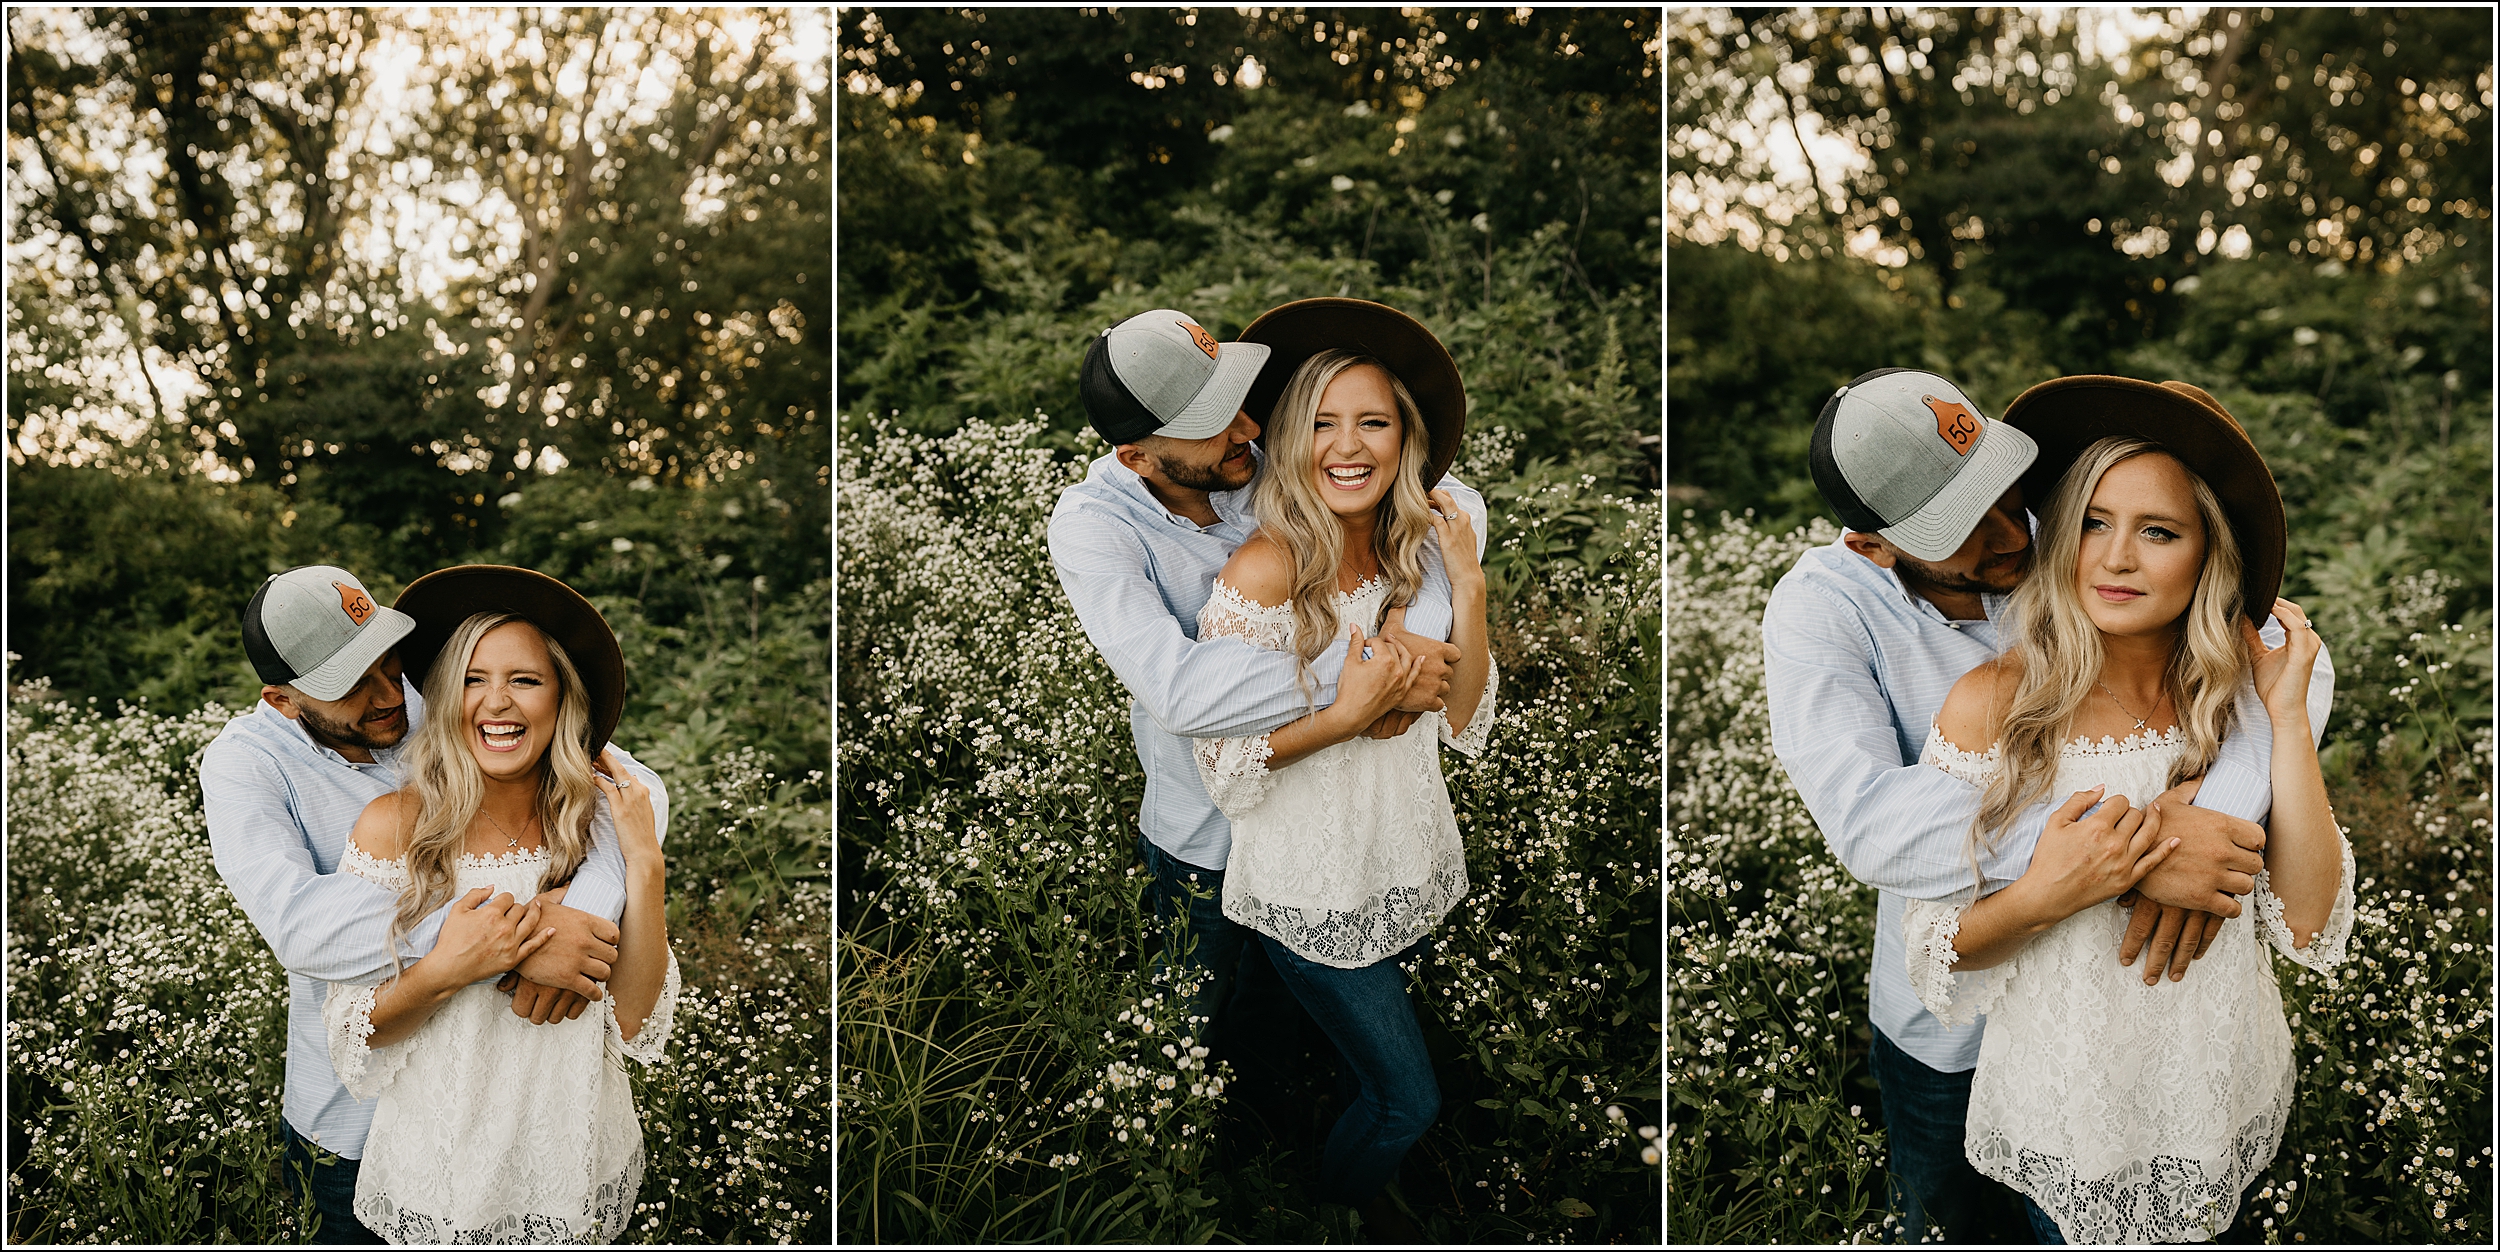 Minnesota couples photographer engagement session wildflowers white flowers sunset trees